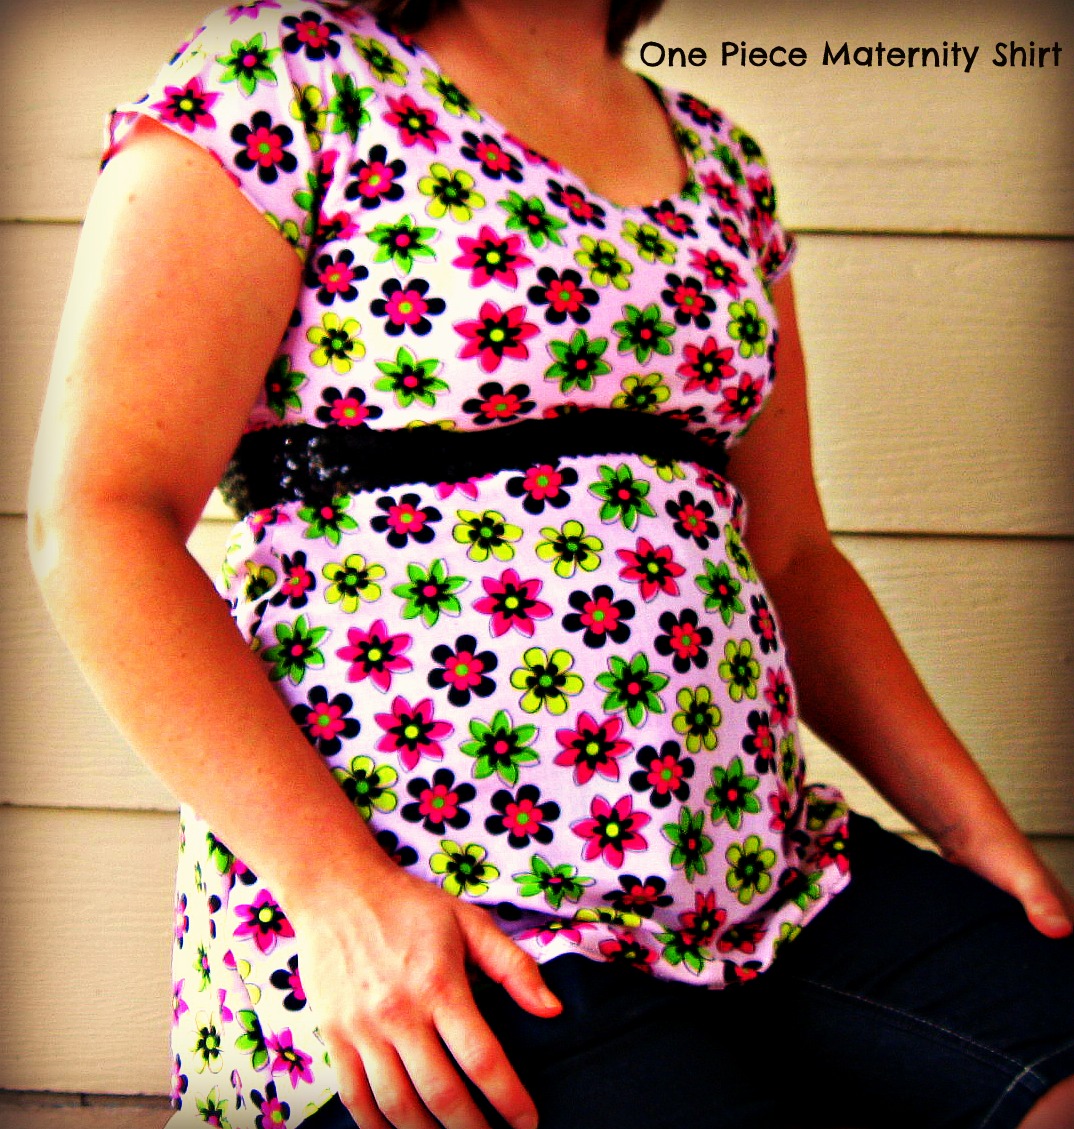 THE REHOMESTEADERS: One Piece Maternity Shirt